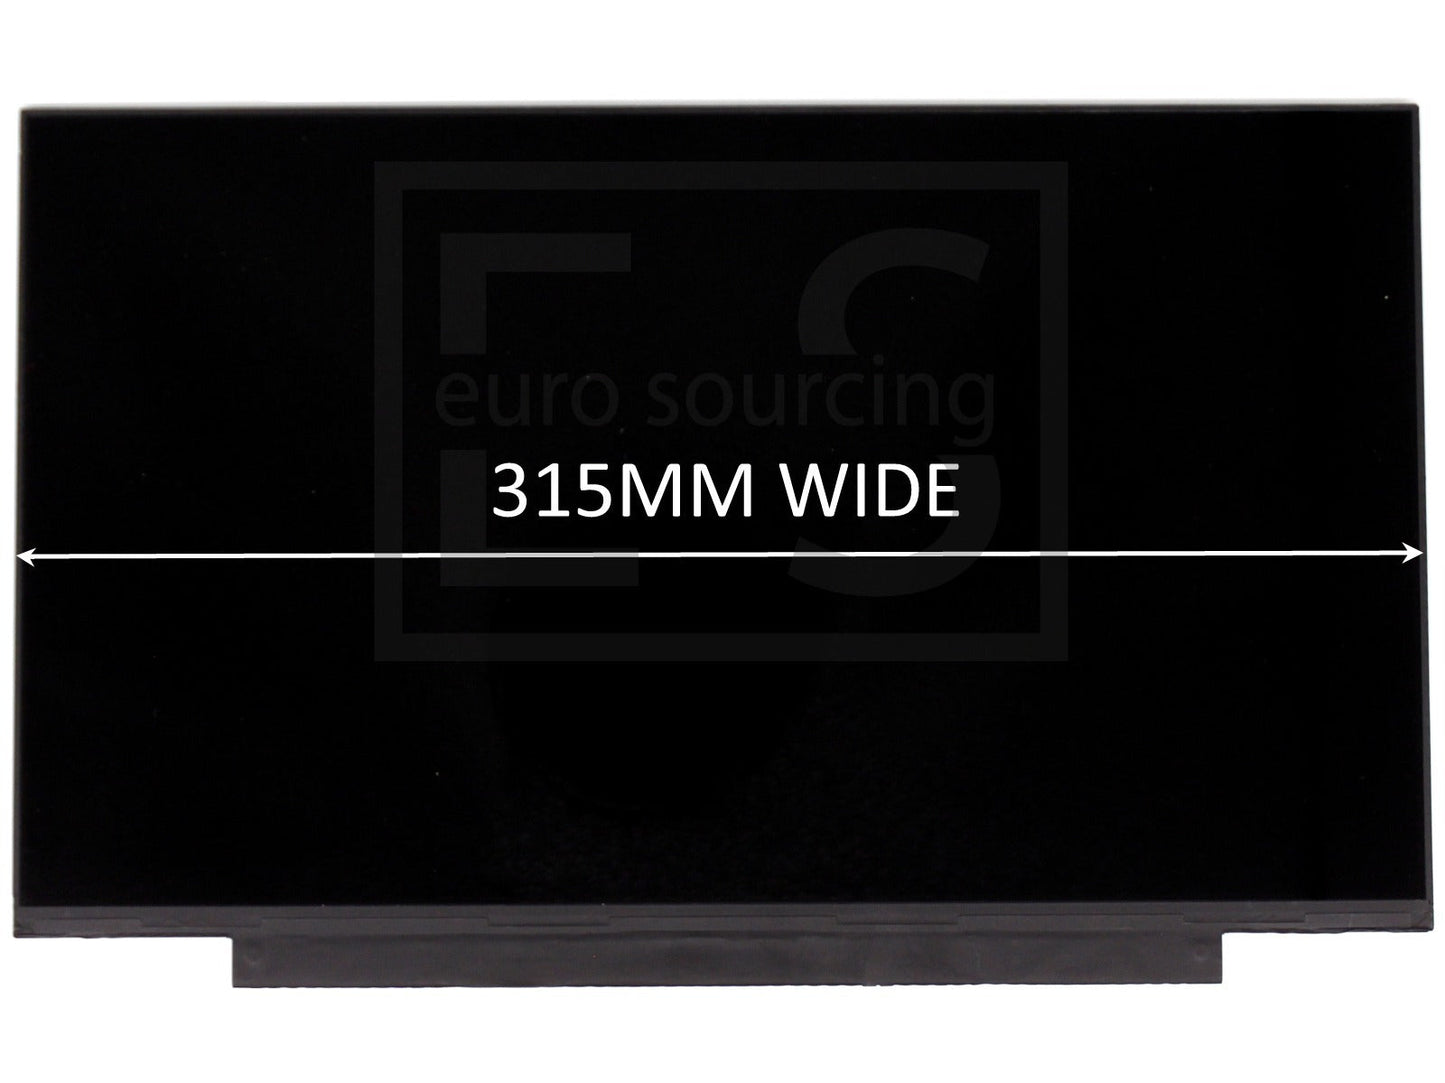 Replacement For N140HGE-EA1 14" LED LCD Screen Matte FHD Non-IPS 315MM Display Panel -Without Brackets Compatible With N140HCA-EAE